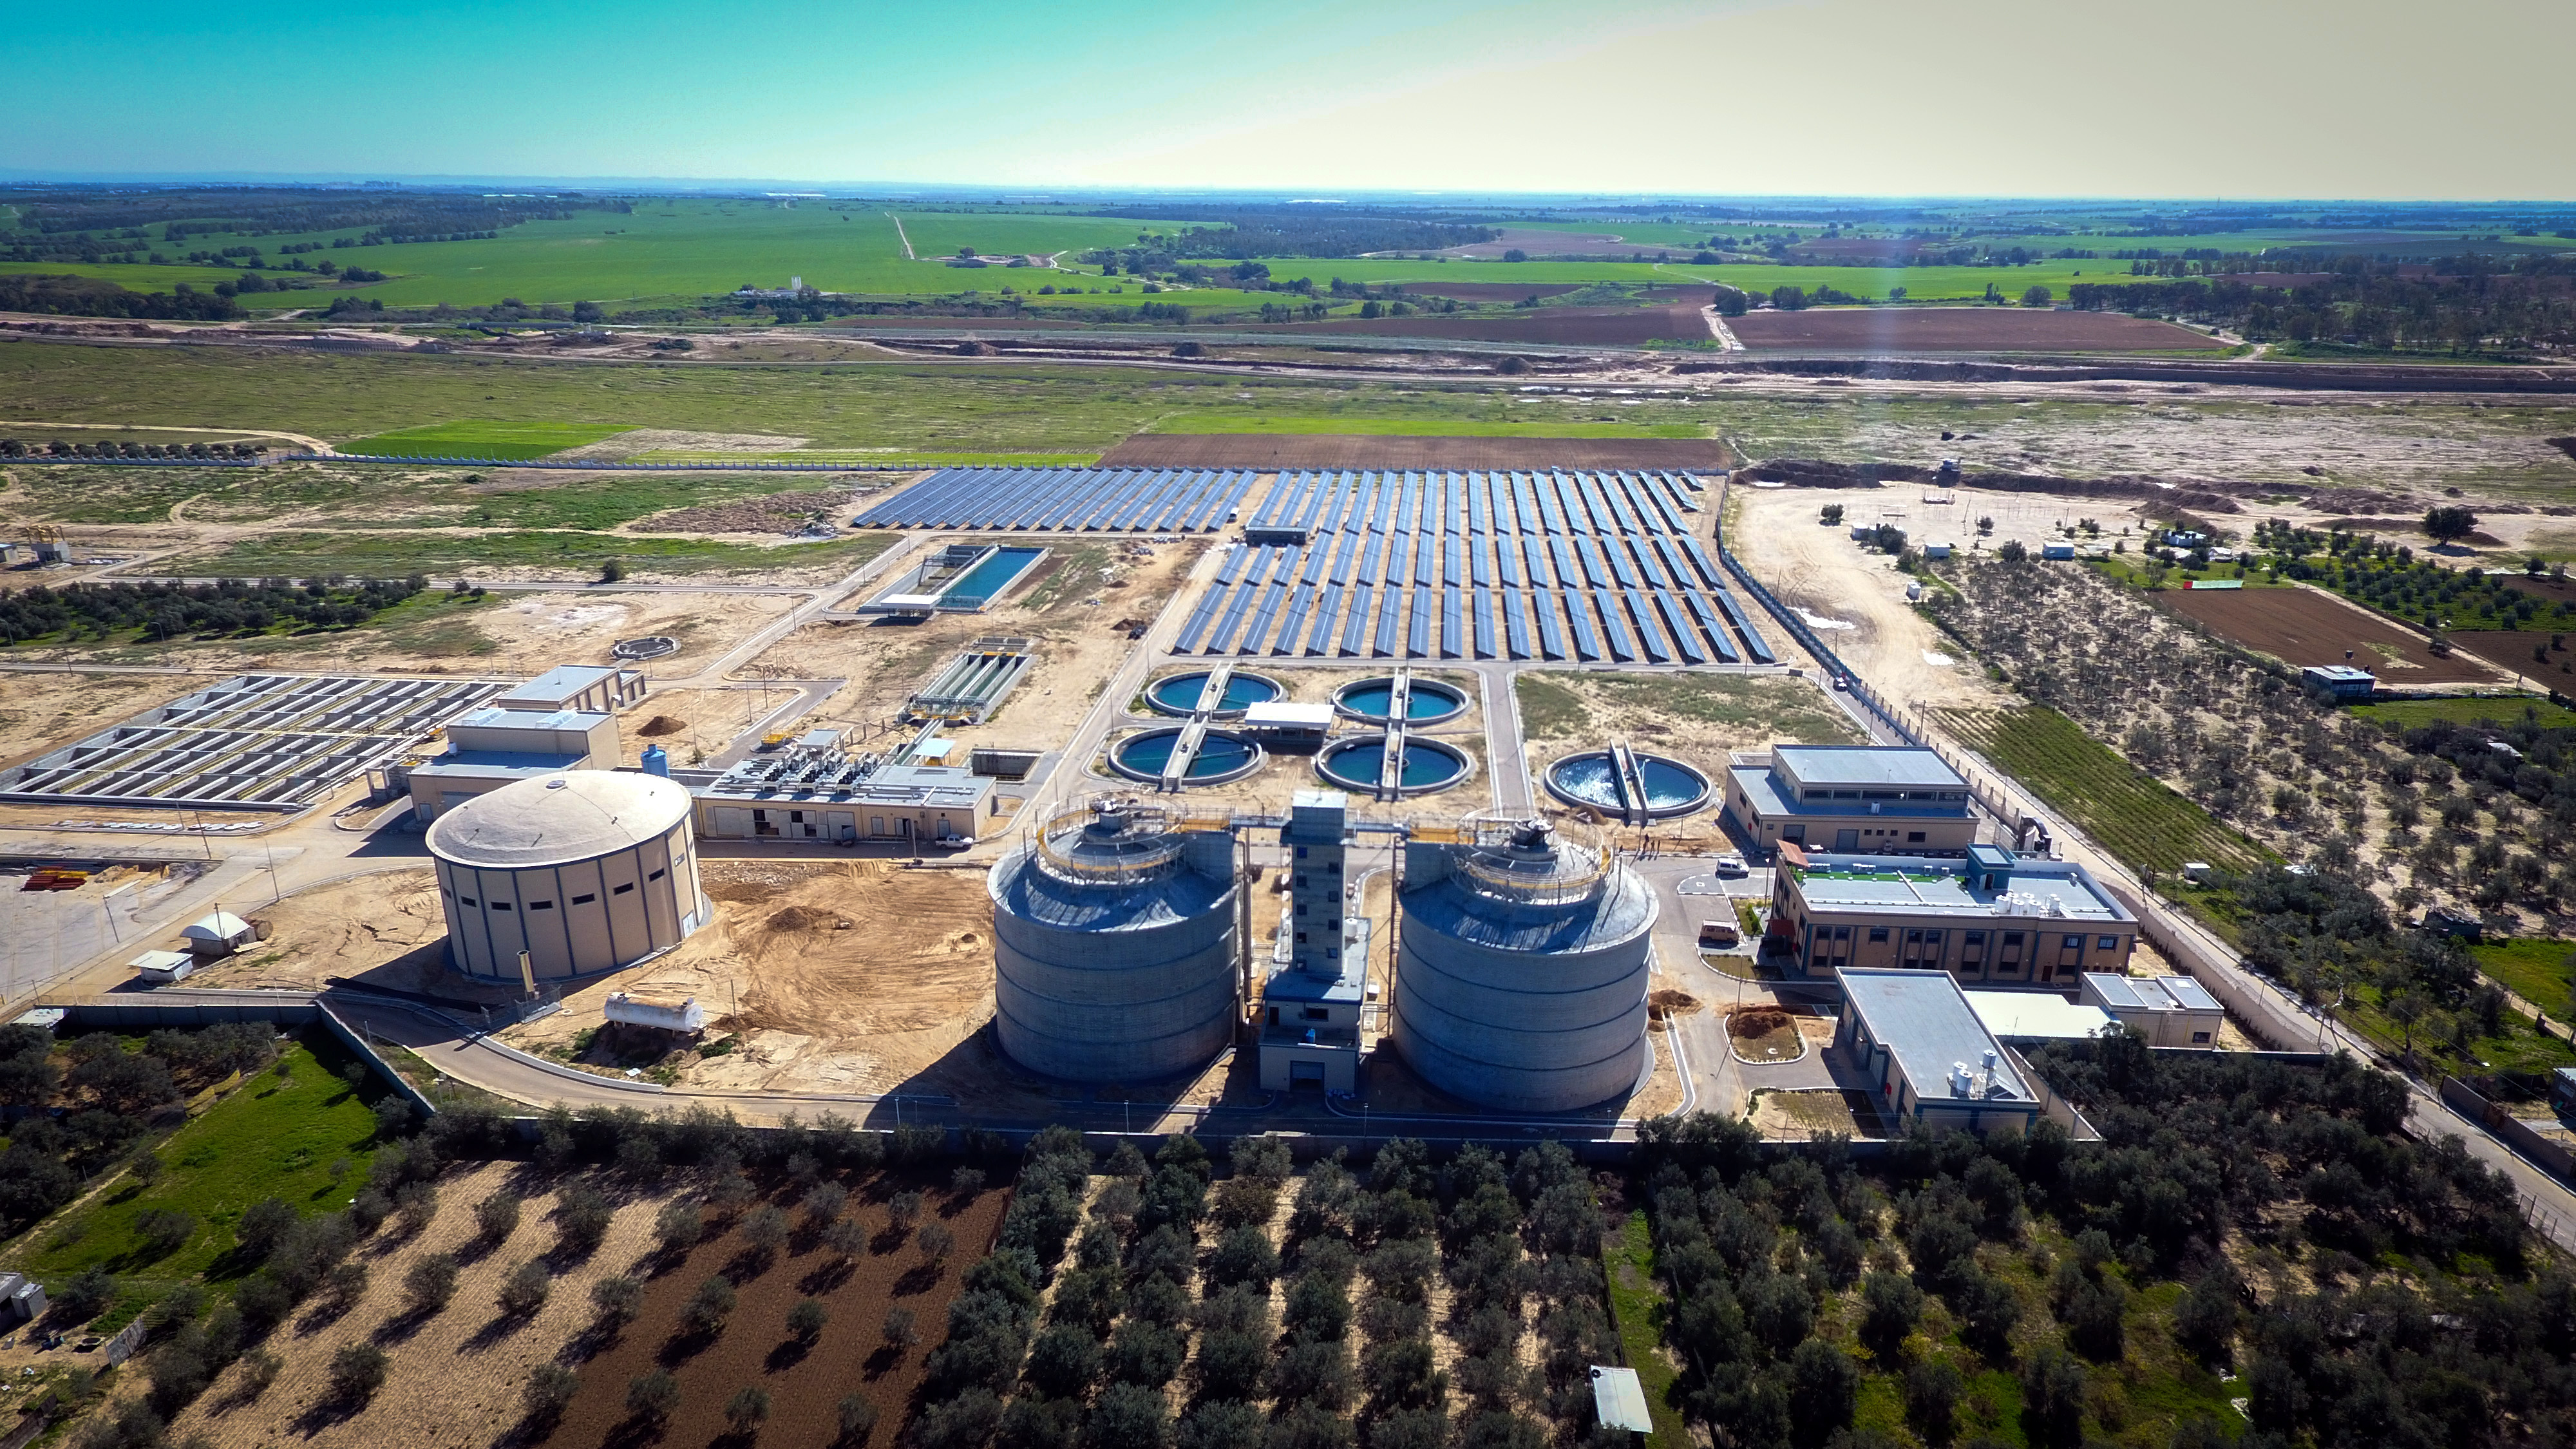 Central sewage treatment plant for Gaza City